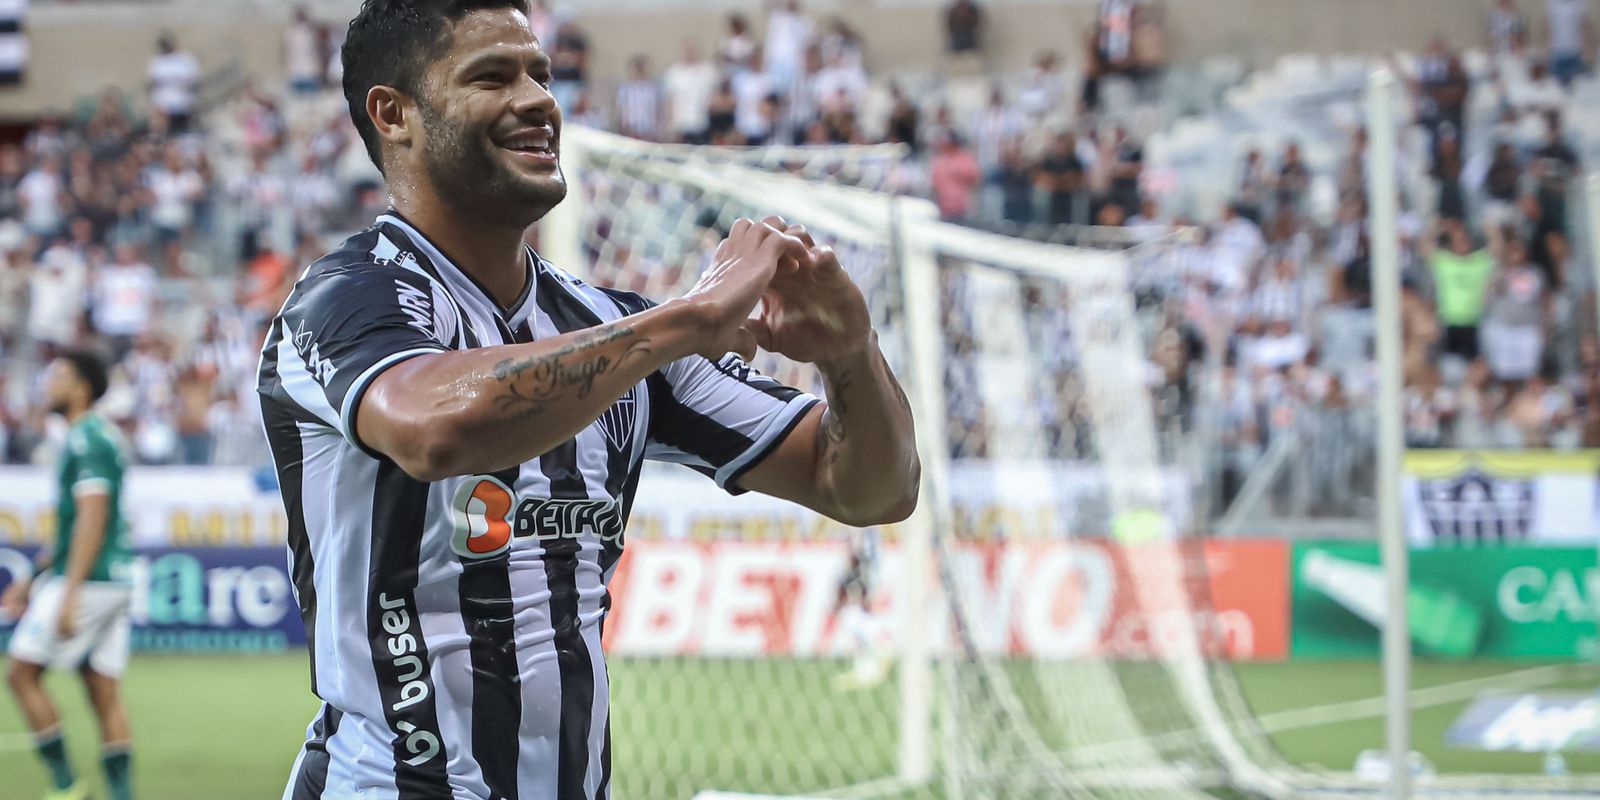 Atlético-MG closes first phase of Mineiro in the lead